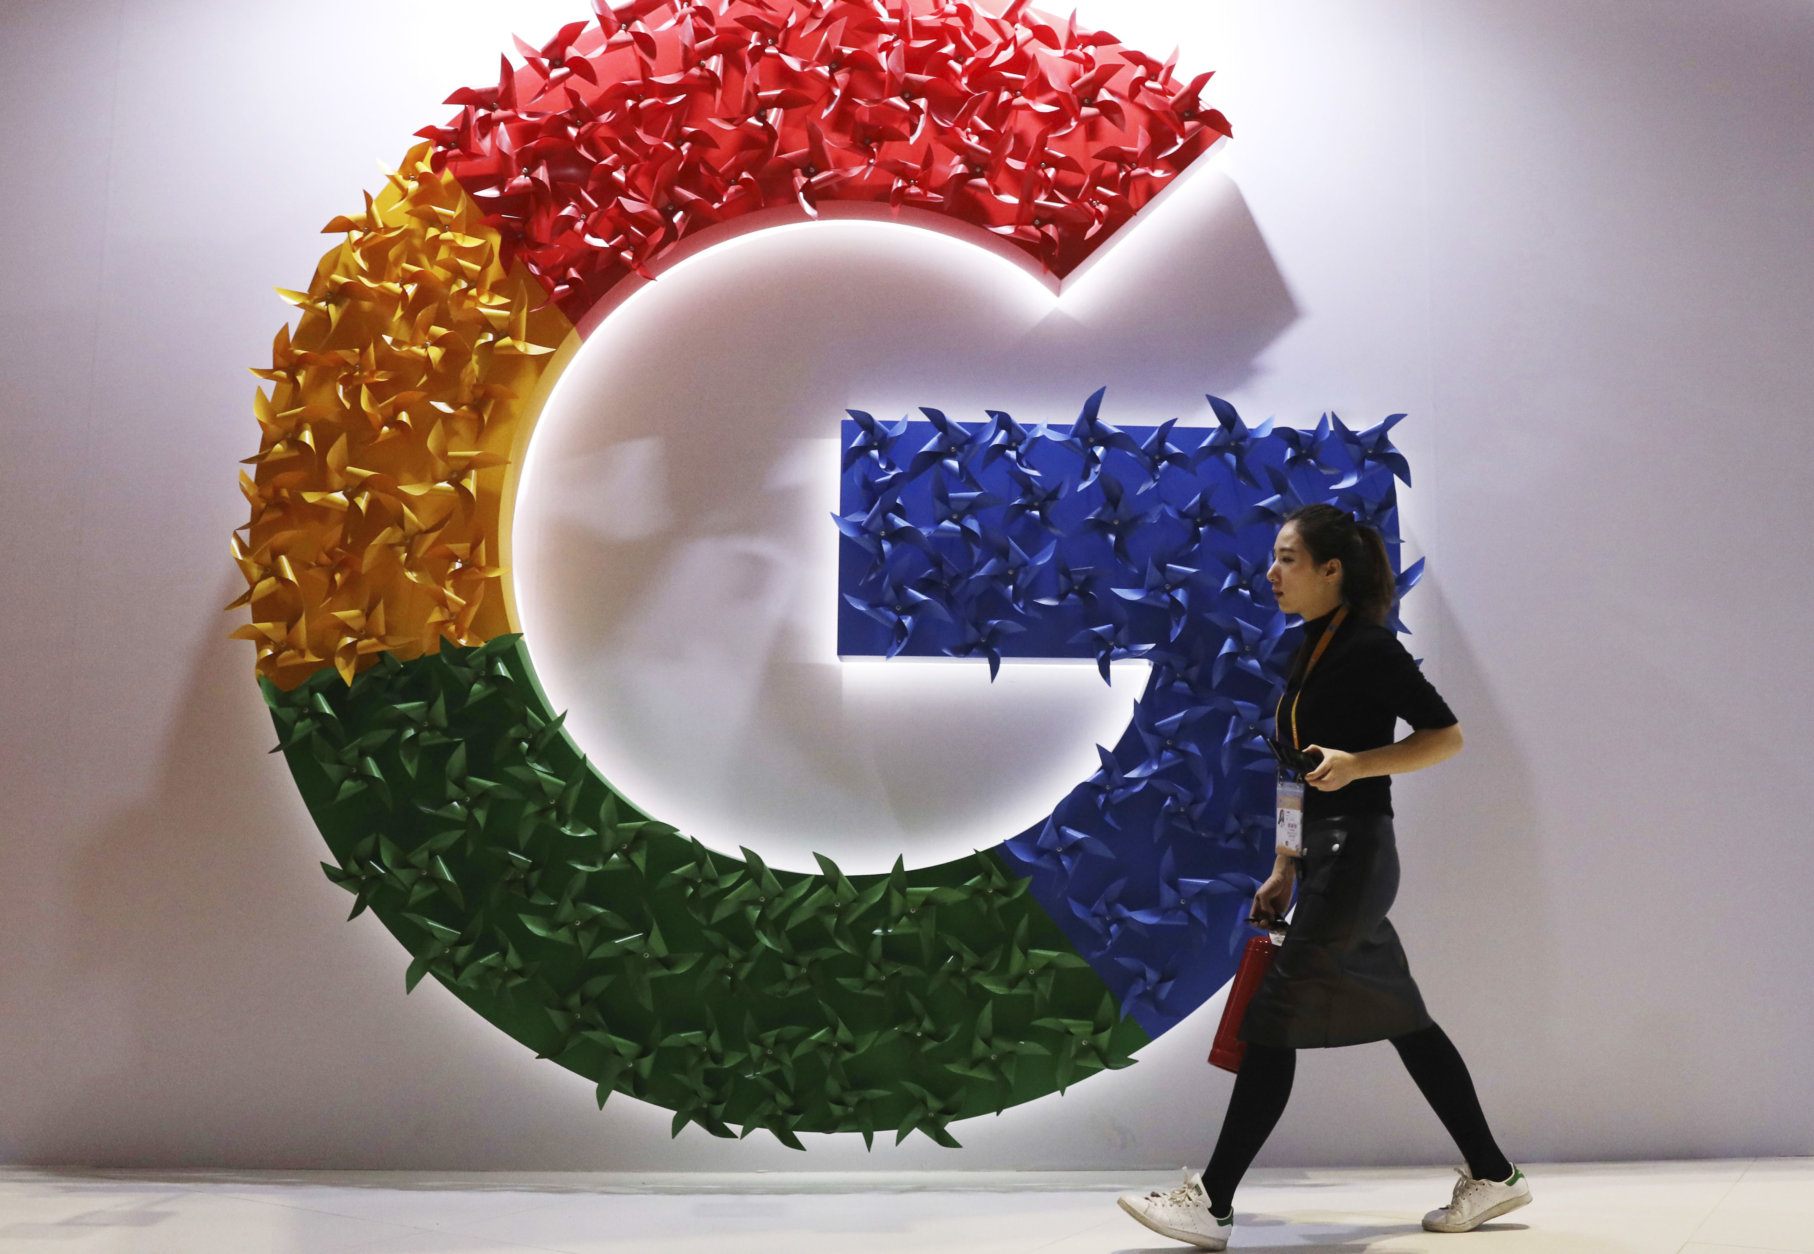 FILE - In this Monday, Nov. 5, 2018 file photo, a woman walks past the logo for Google at the China International Import Expo in Shanghai. The European Union’s executive Commission has slapped Google with multibillion dollar fines for repeatedly abusing its market dominance to stifle competition, and demanded that online companies explain more clearly to users what happens to their personal data. (AP Photo/Ng Han Guan, FILE)